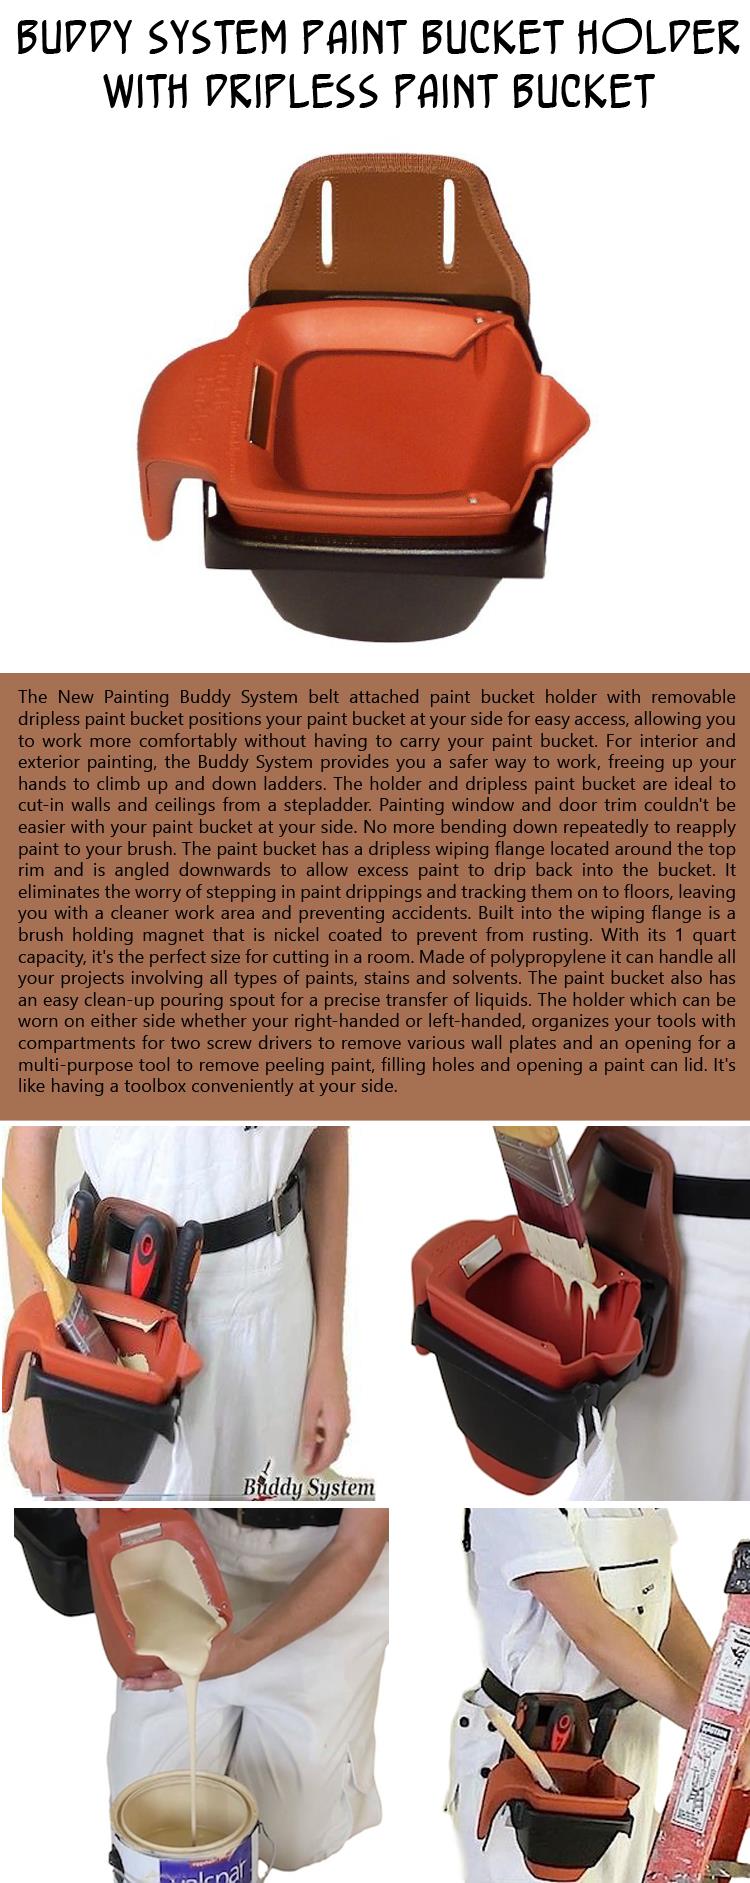 buddy-system-paint-bucket-holder-with-dripless-paint-bucket